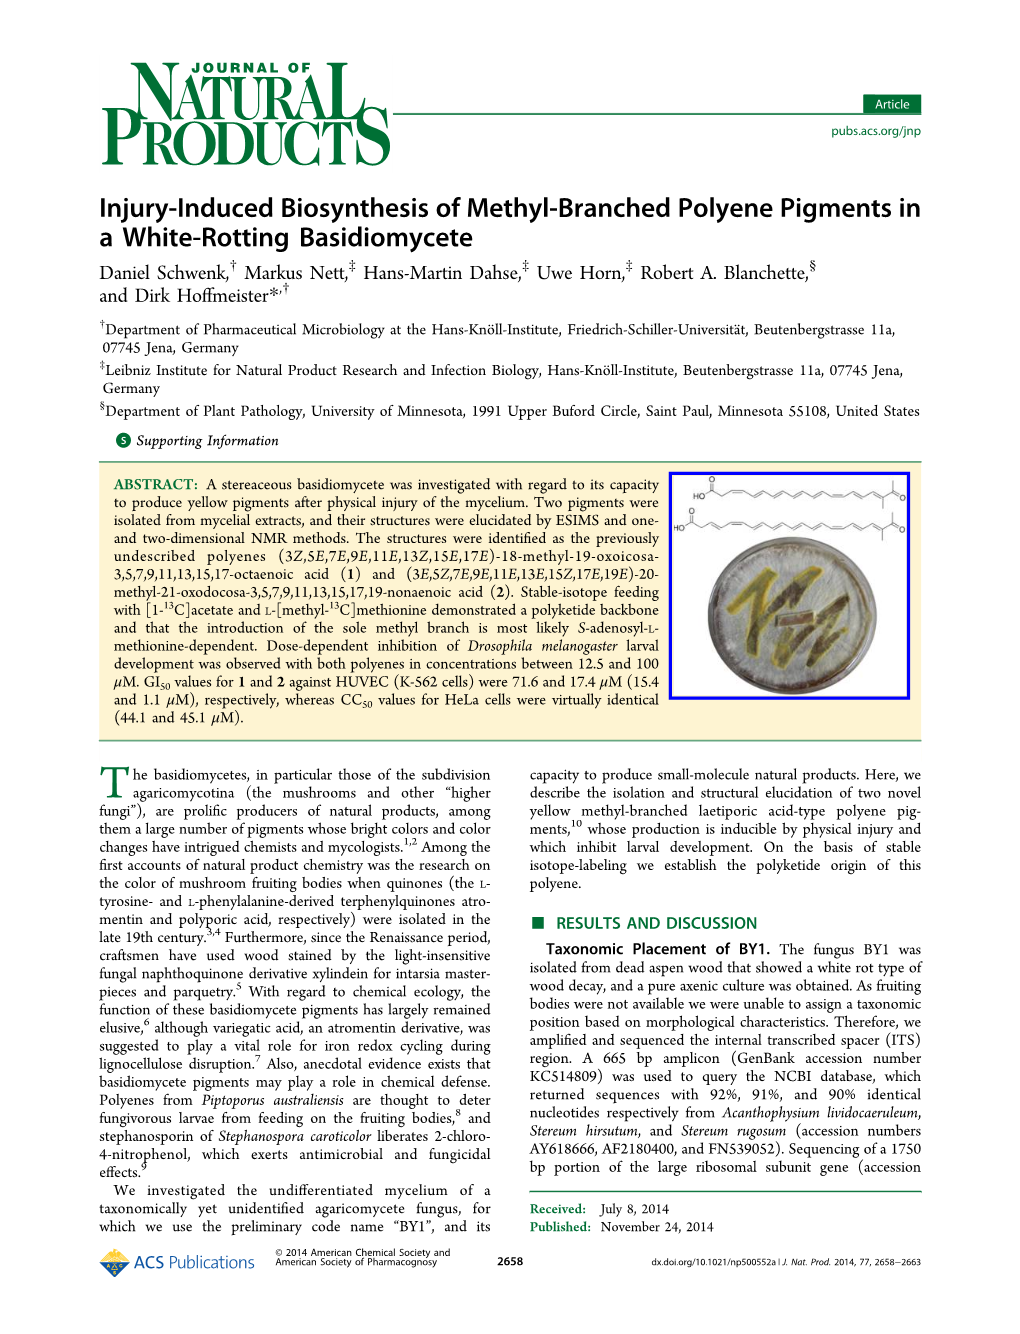 Injury-Induced Biosynthesis of Methyl-Branched Polyene Pigments